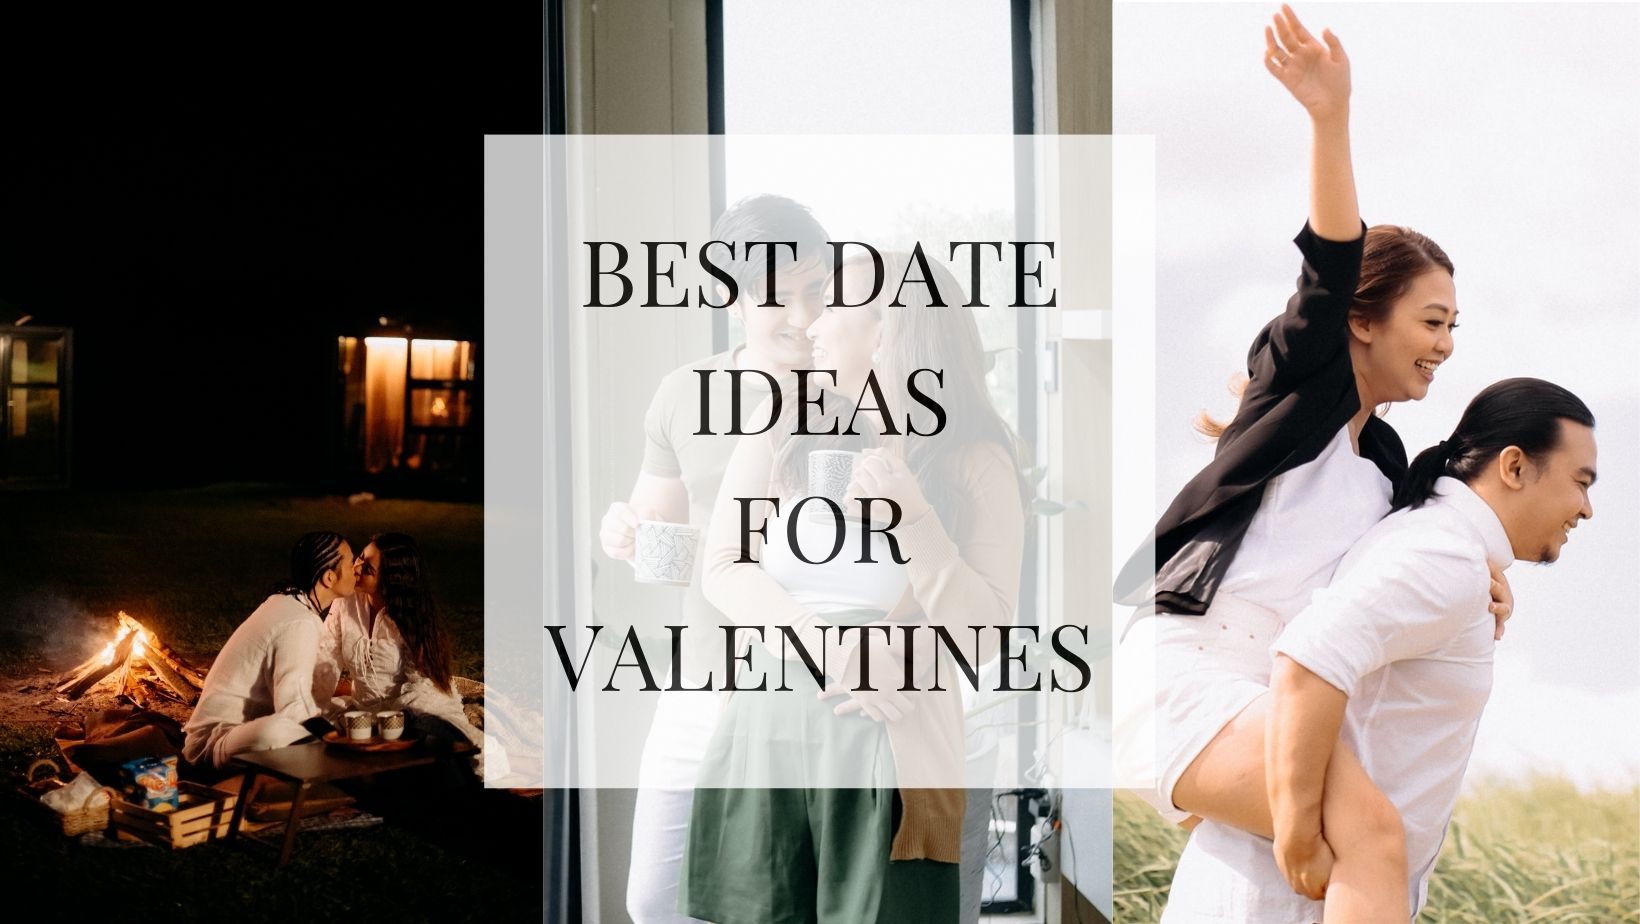 BEST DATE IDEAS FOR VALENTINES